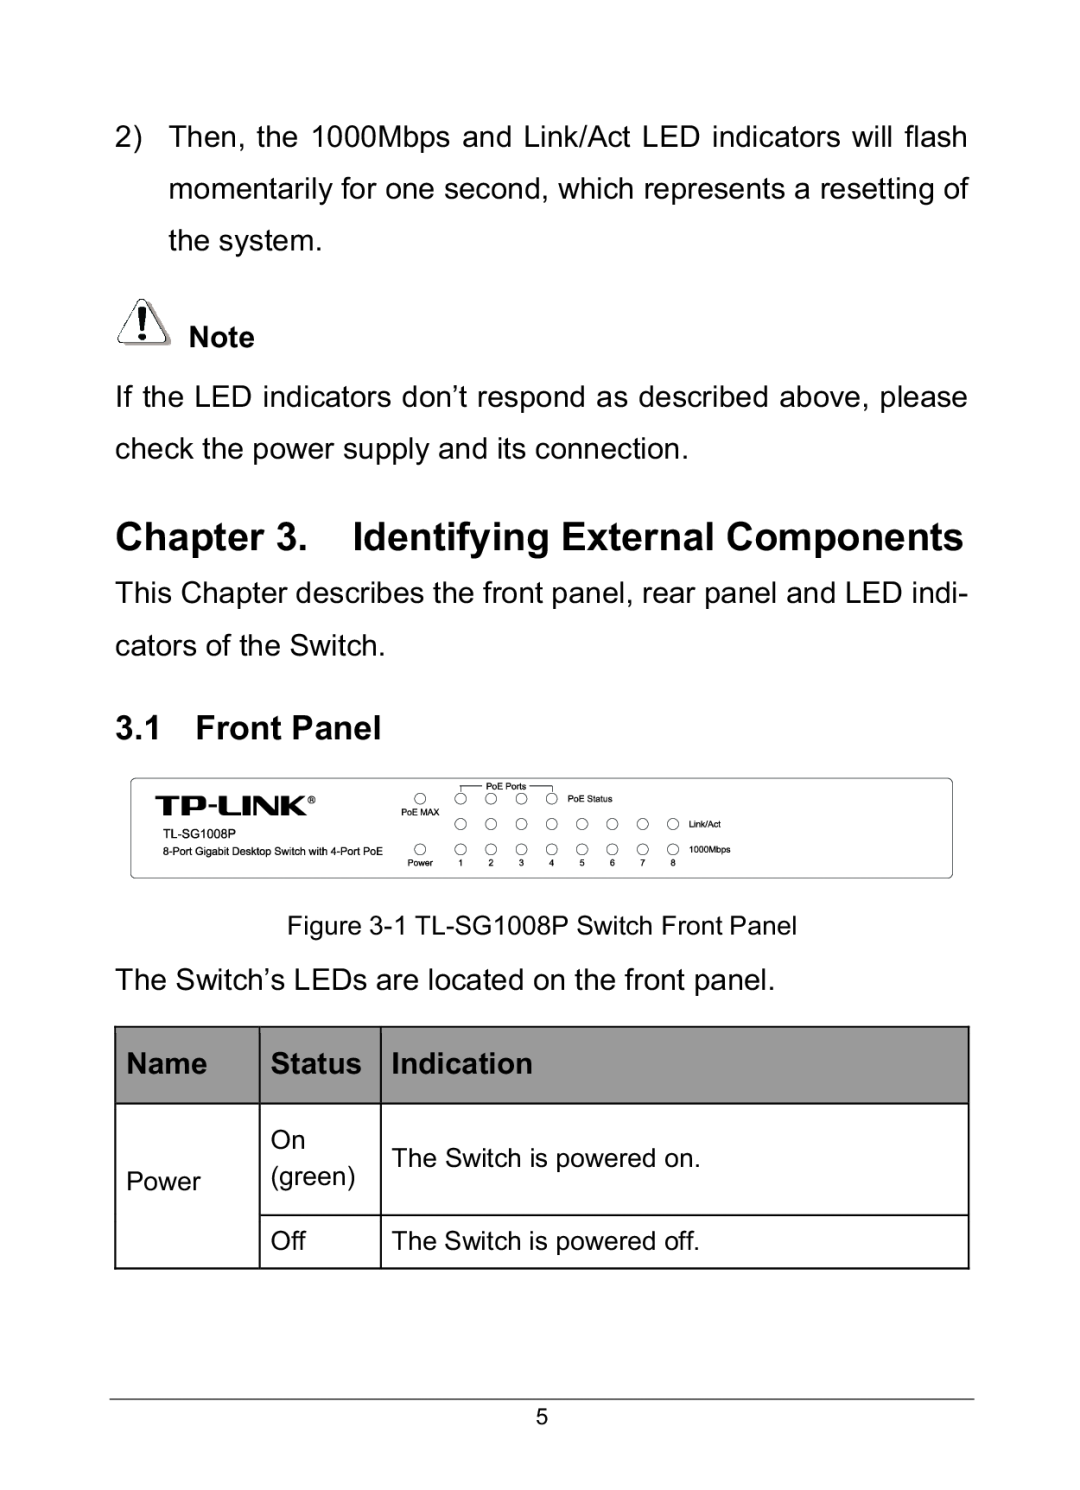 TP-Link TL-SG1008P manual Identifying External Components, Front Panel 